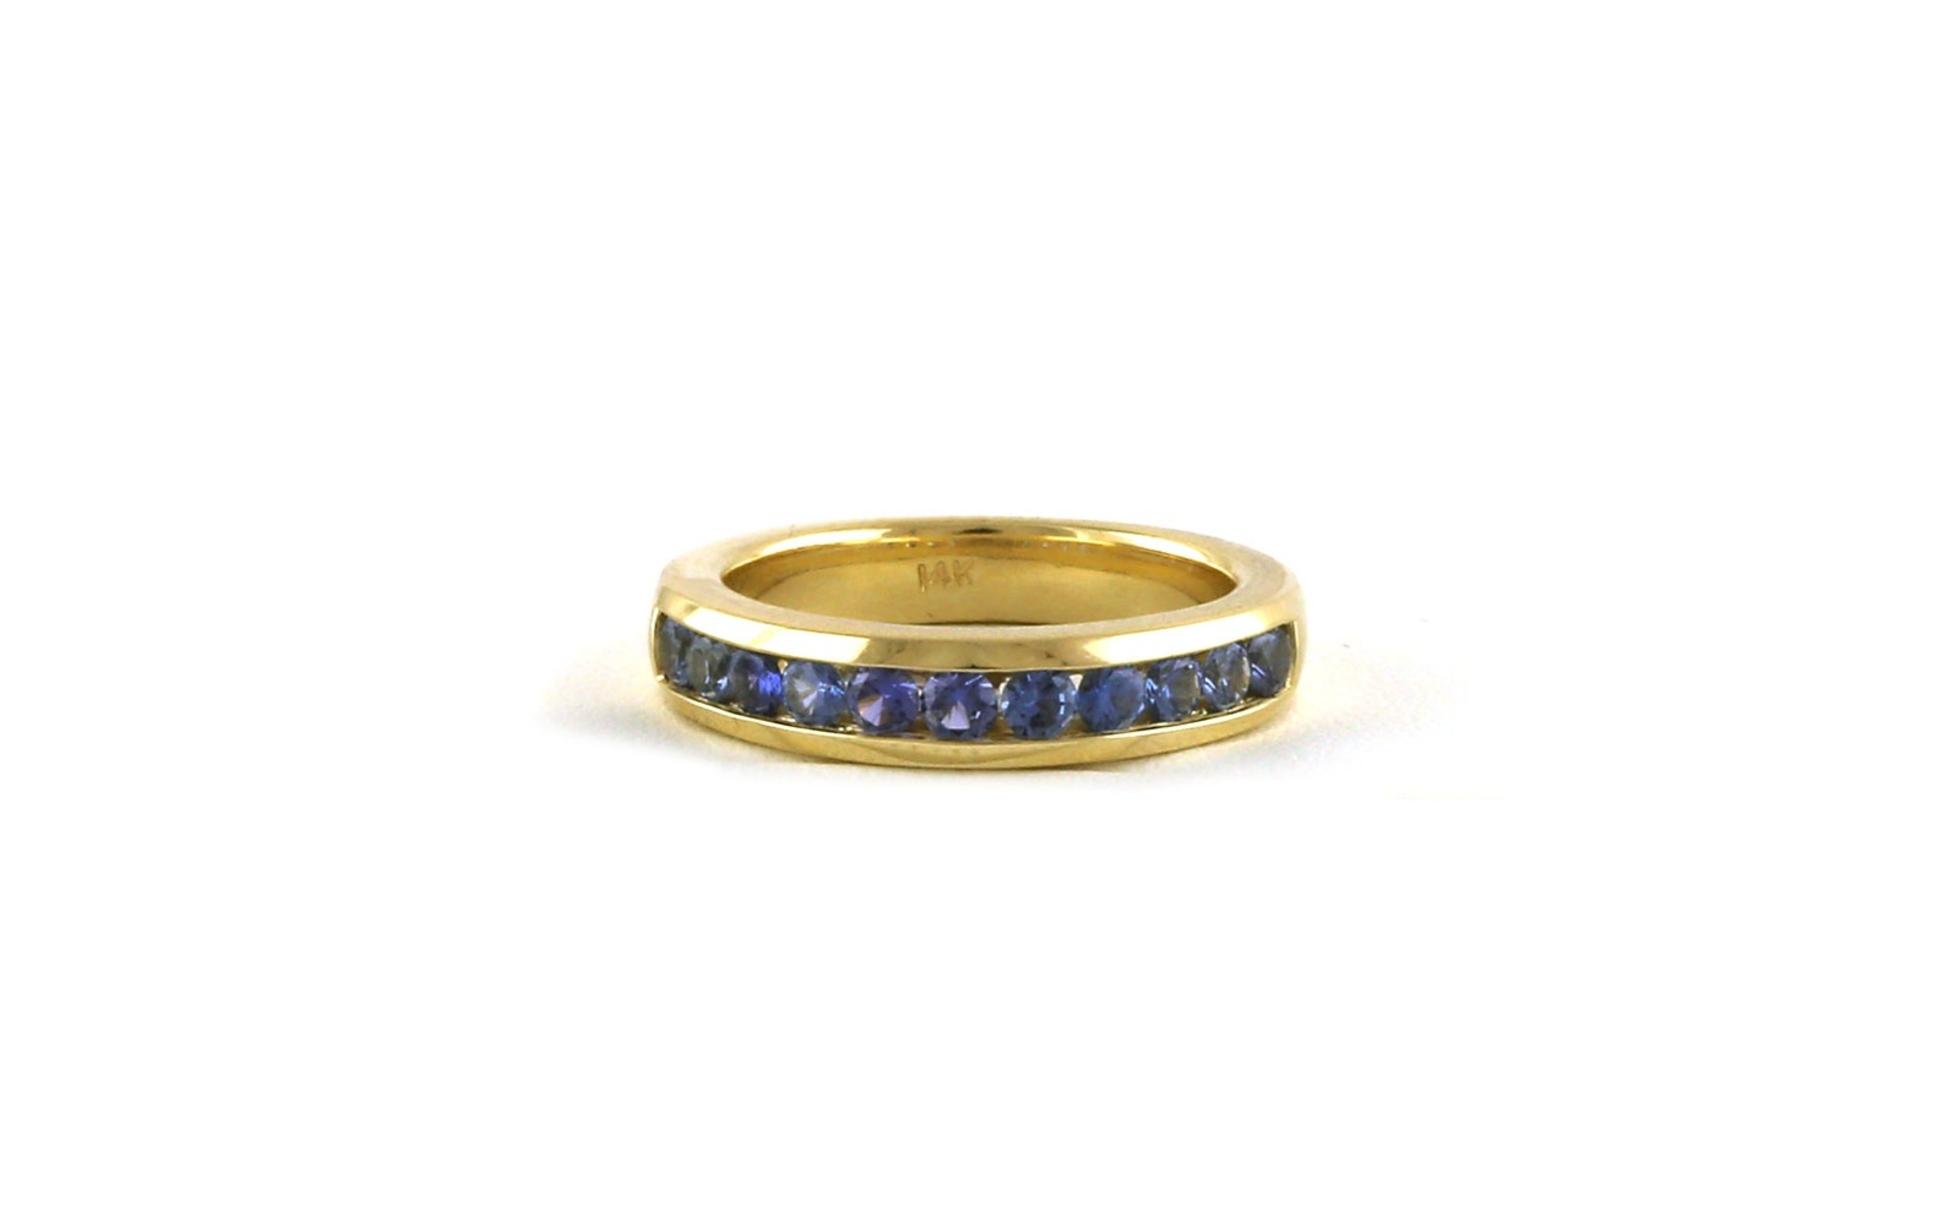 11-Stone Channel-set Montana Yogo Sapphire Band in Yellow Gold (0.82cts TWT)